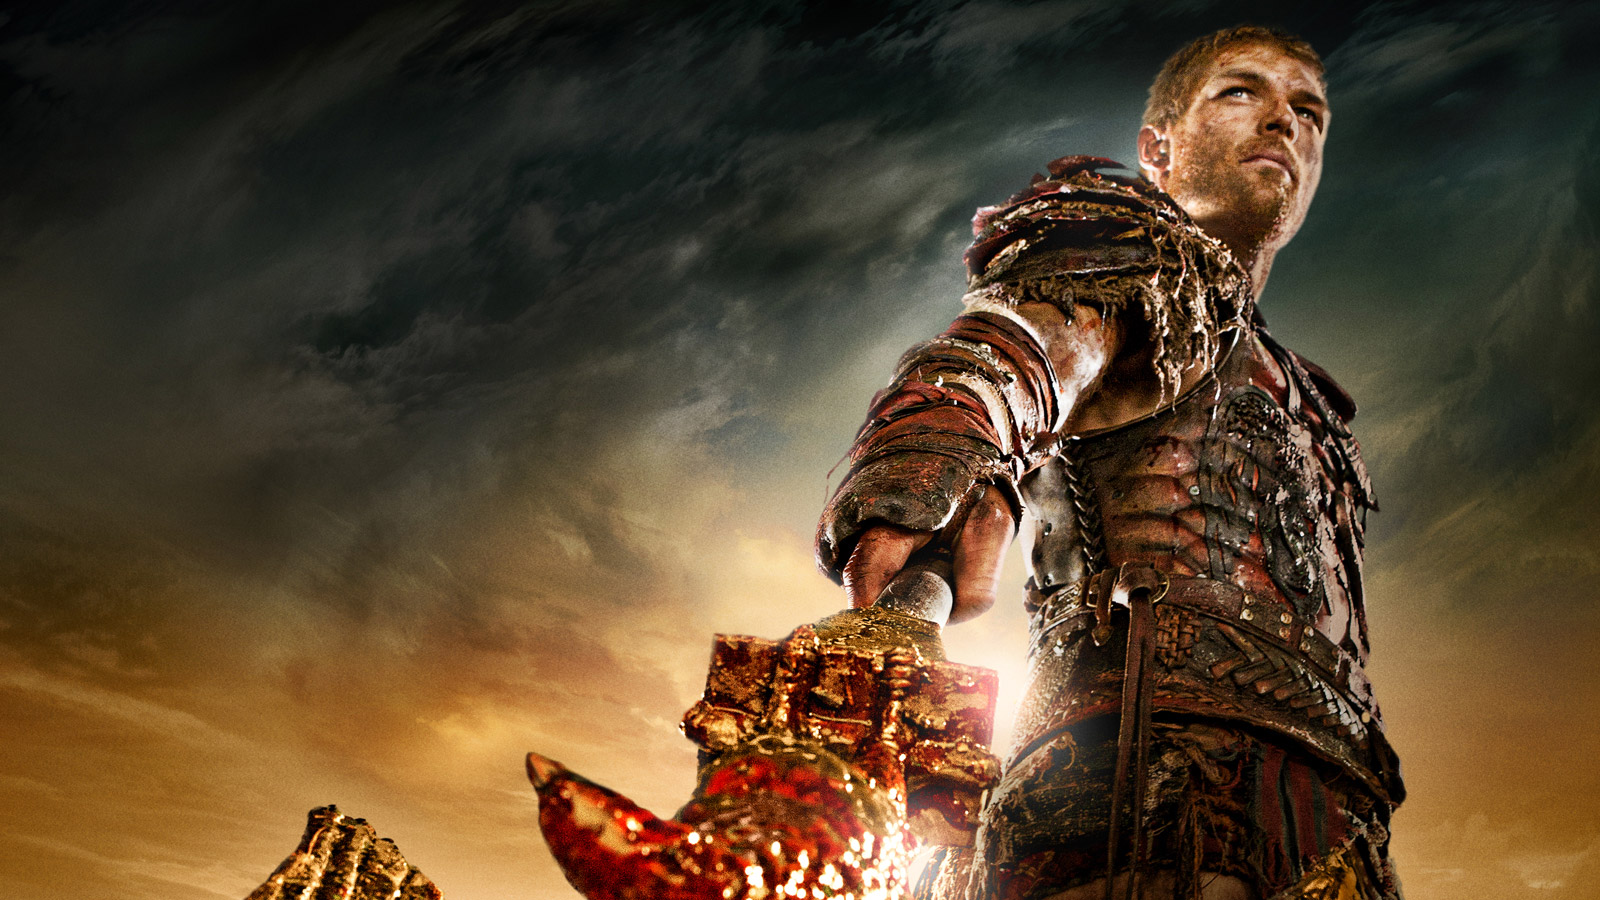 Spartacus - War of the Damned Imagenes y Wallpapers HD - Taringa